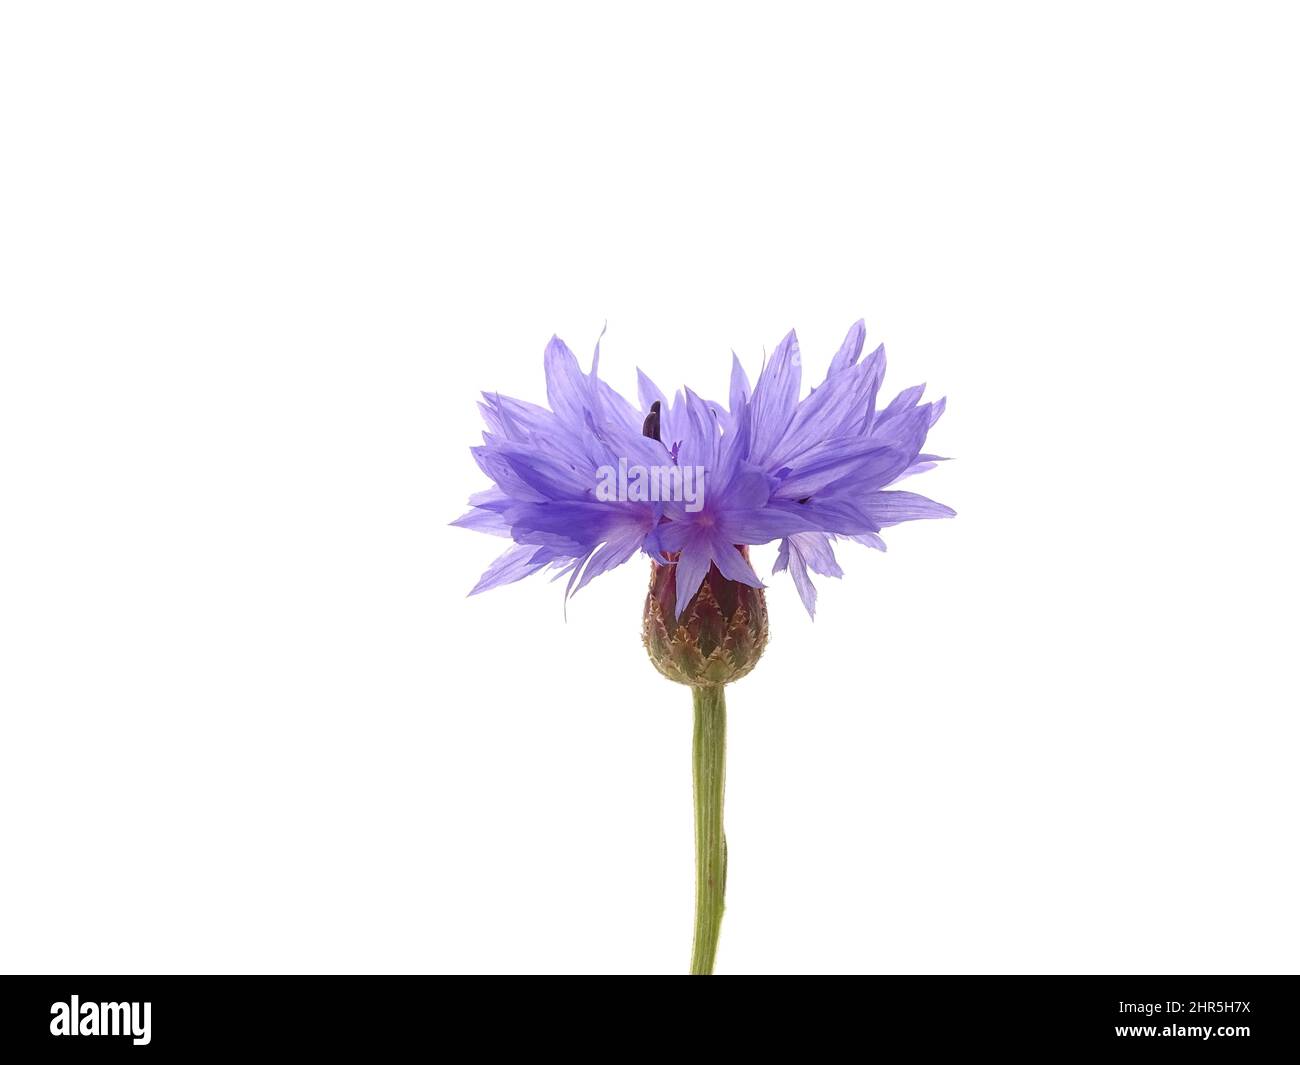 Blue cornflower (Centaurea cyanus) isolated on a white background, with colors green, blue, purple and white Stock Photo